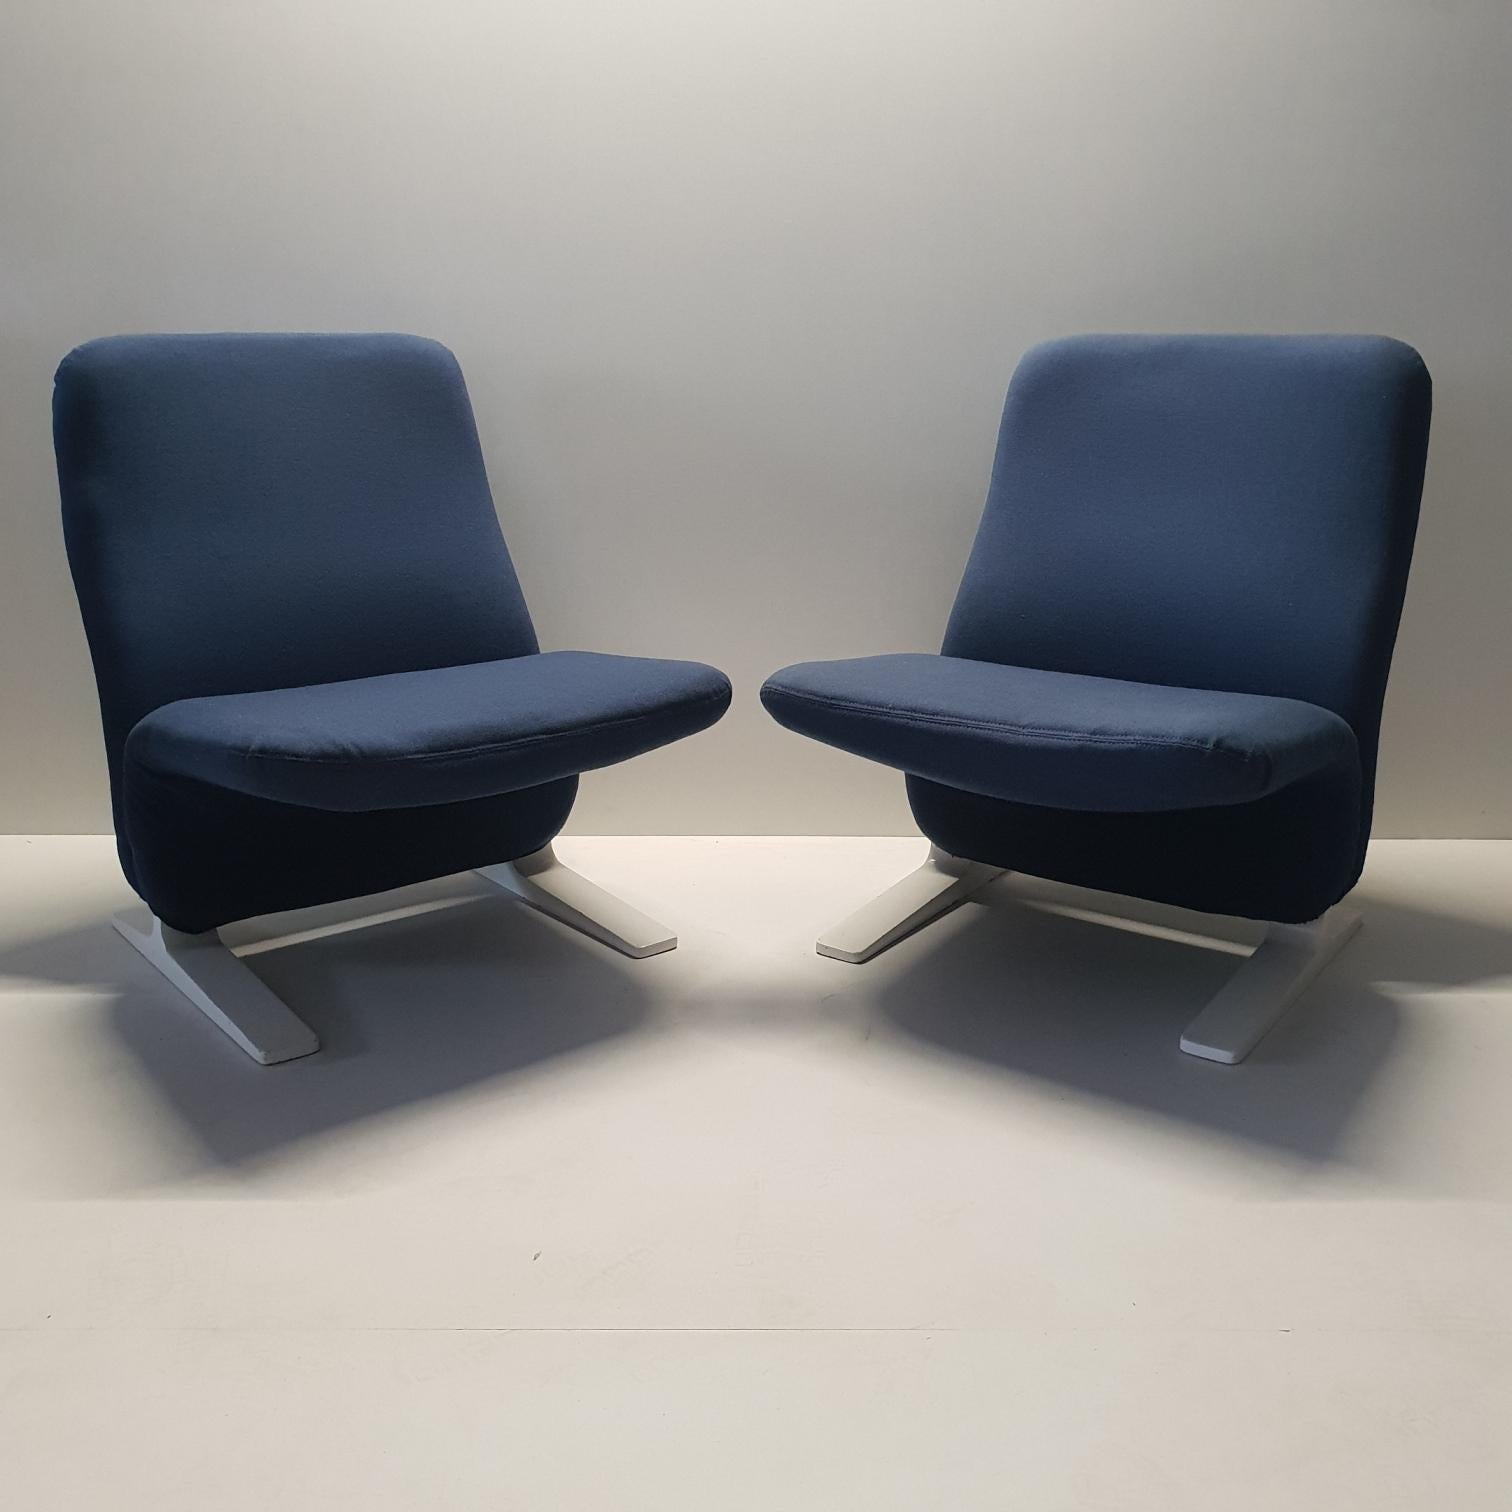 Pair of lounge chairs model Concorde F780 by Pierre Paulin for Artifort (marked), 1960s.
With the original Kvadrat upholstery.
 